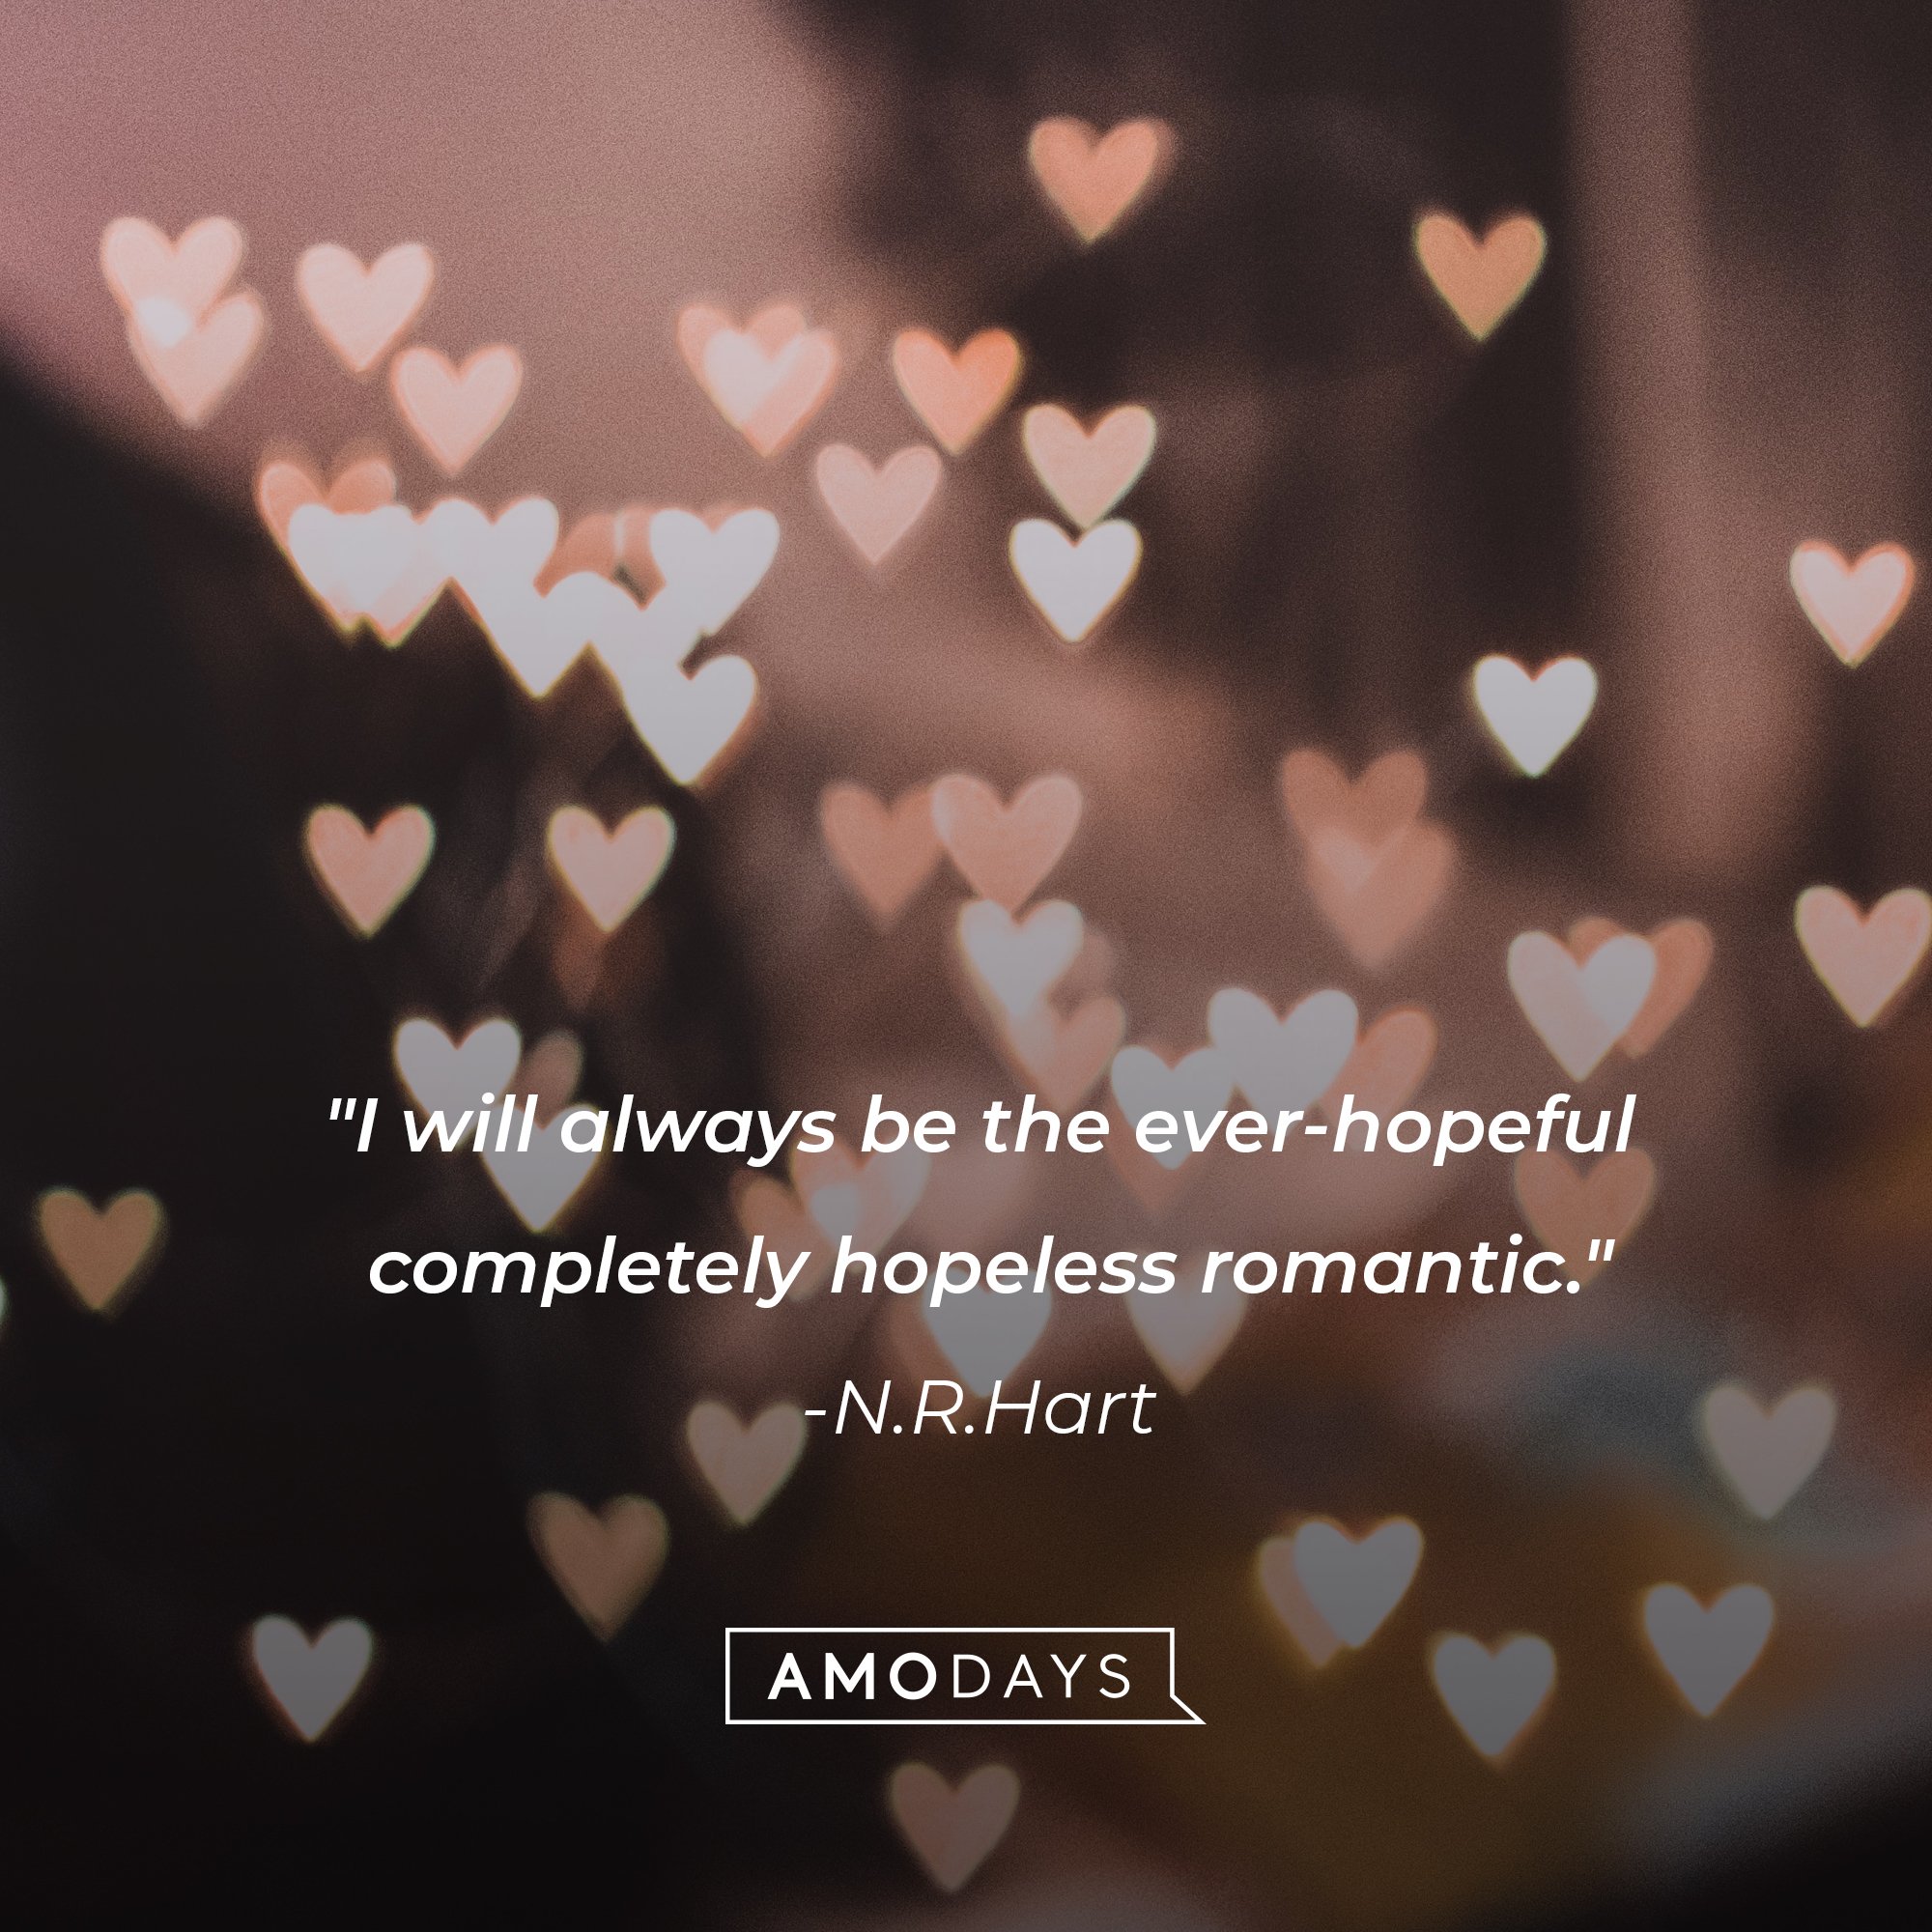 N.R.Hart’s quote: "I will always be the ever-hopeful completely hopeless romantic."  | Image: AmoDays